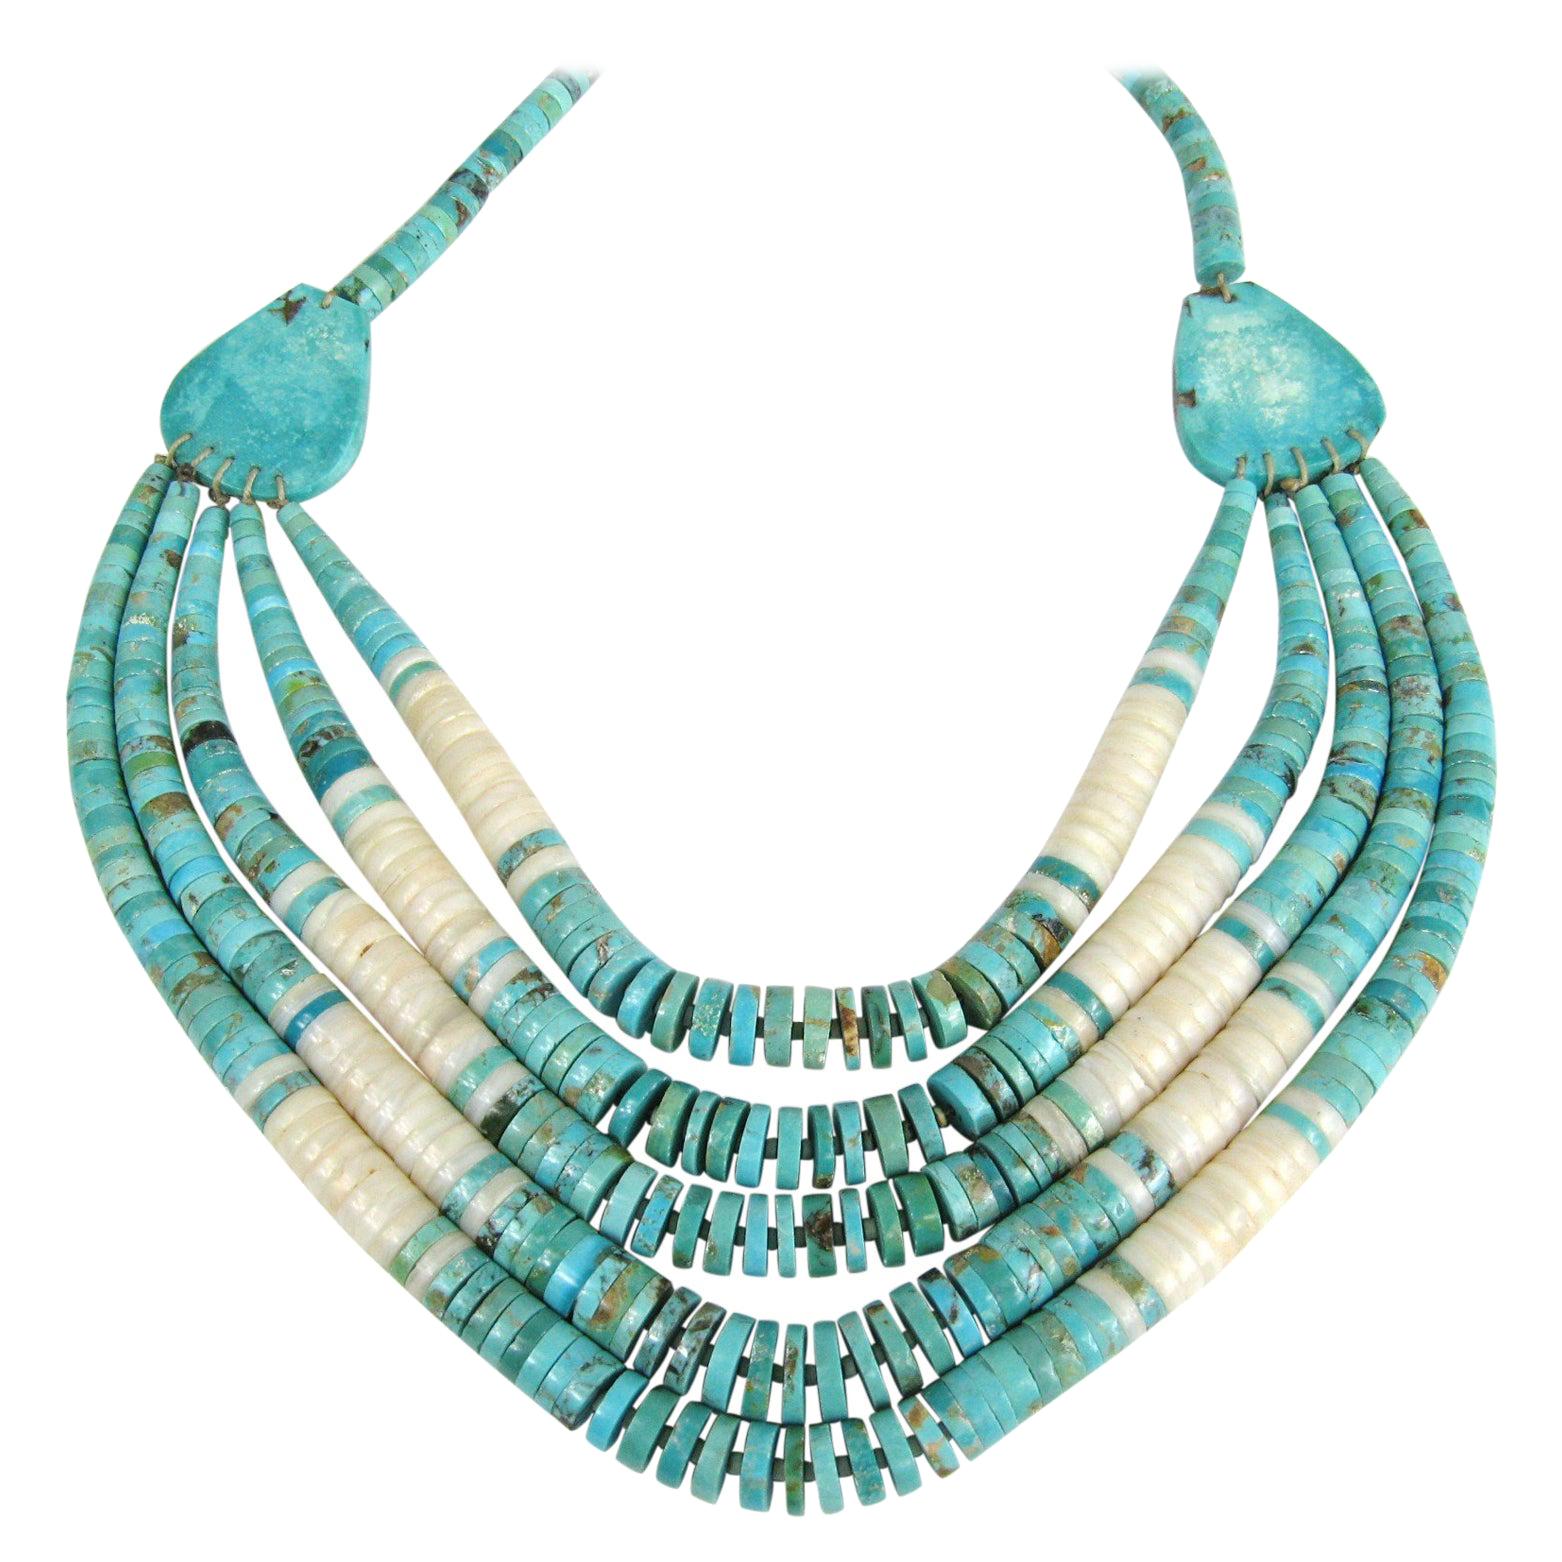 Details about   Navajo Native American Turquoise  Shell Heishi Sterling Silver Bead Necklace 764 